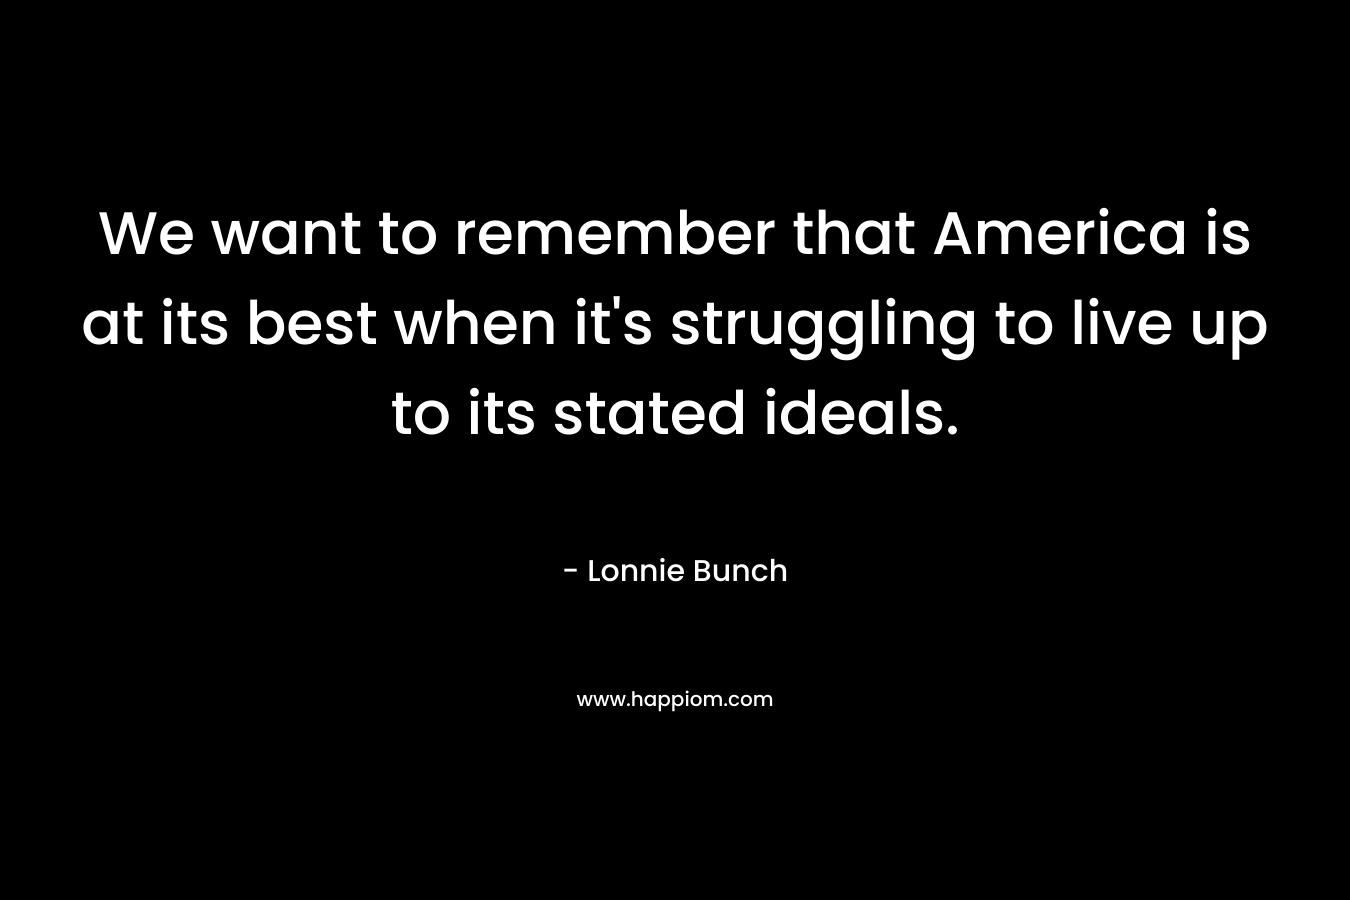 We want to remember that America is at its best when it’s struggling to live up to its stated ideals. – Lonnie Bunch